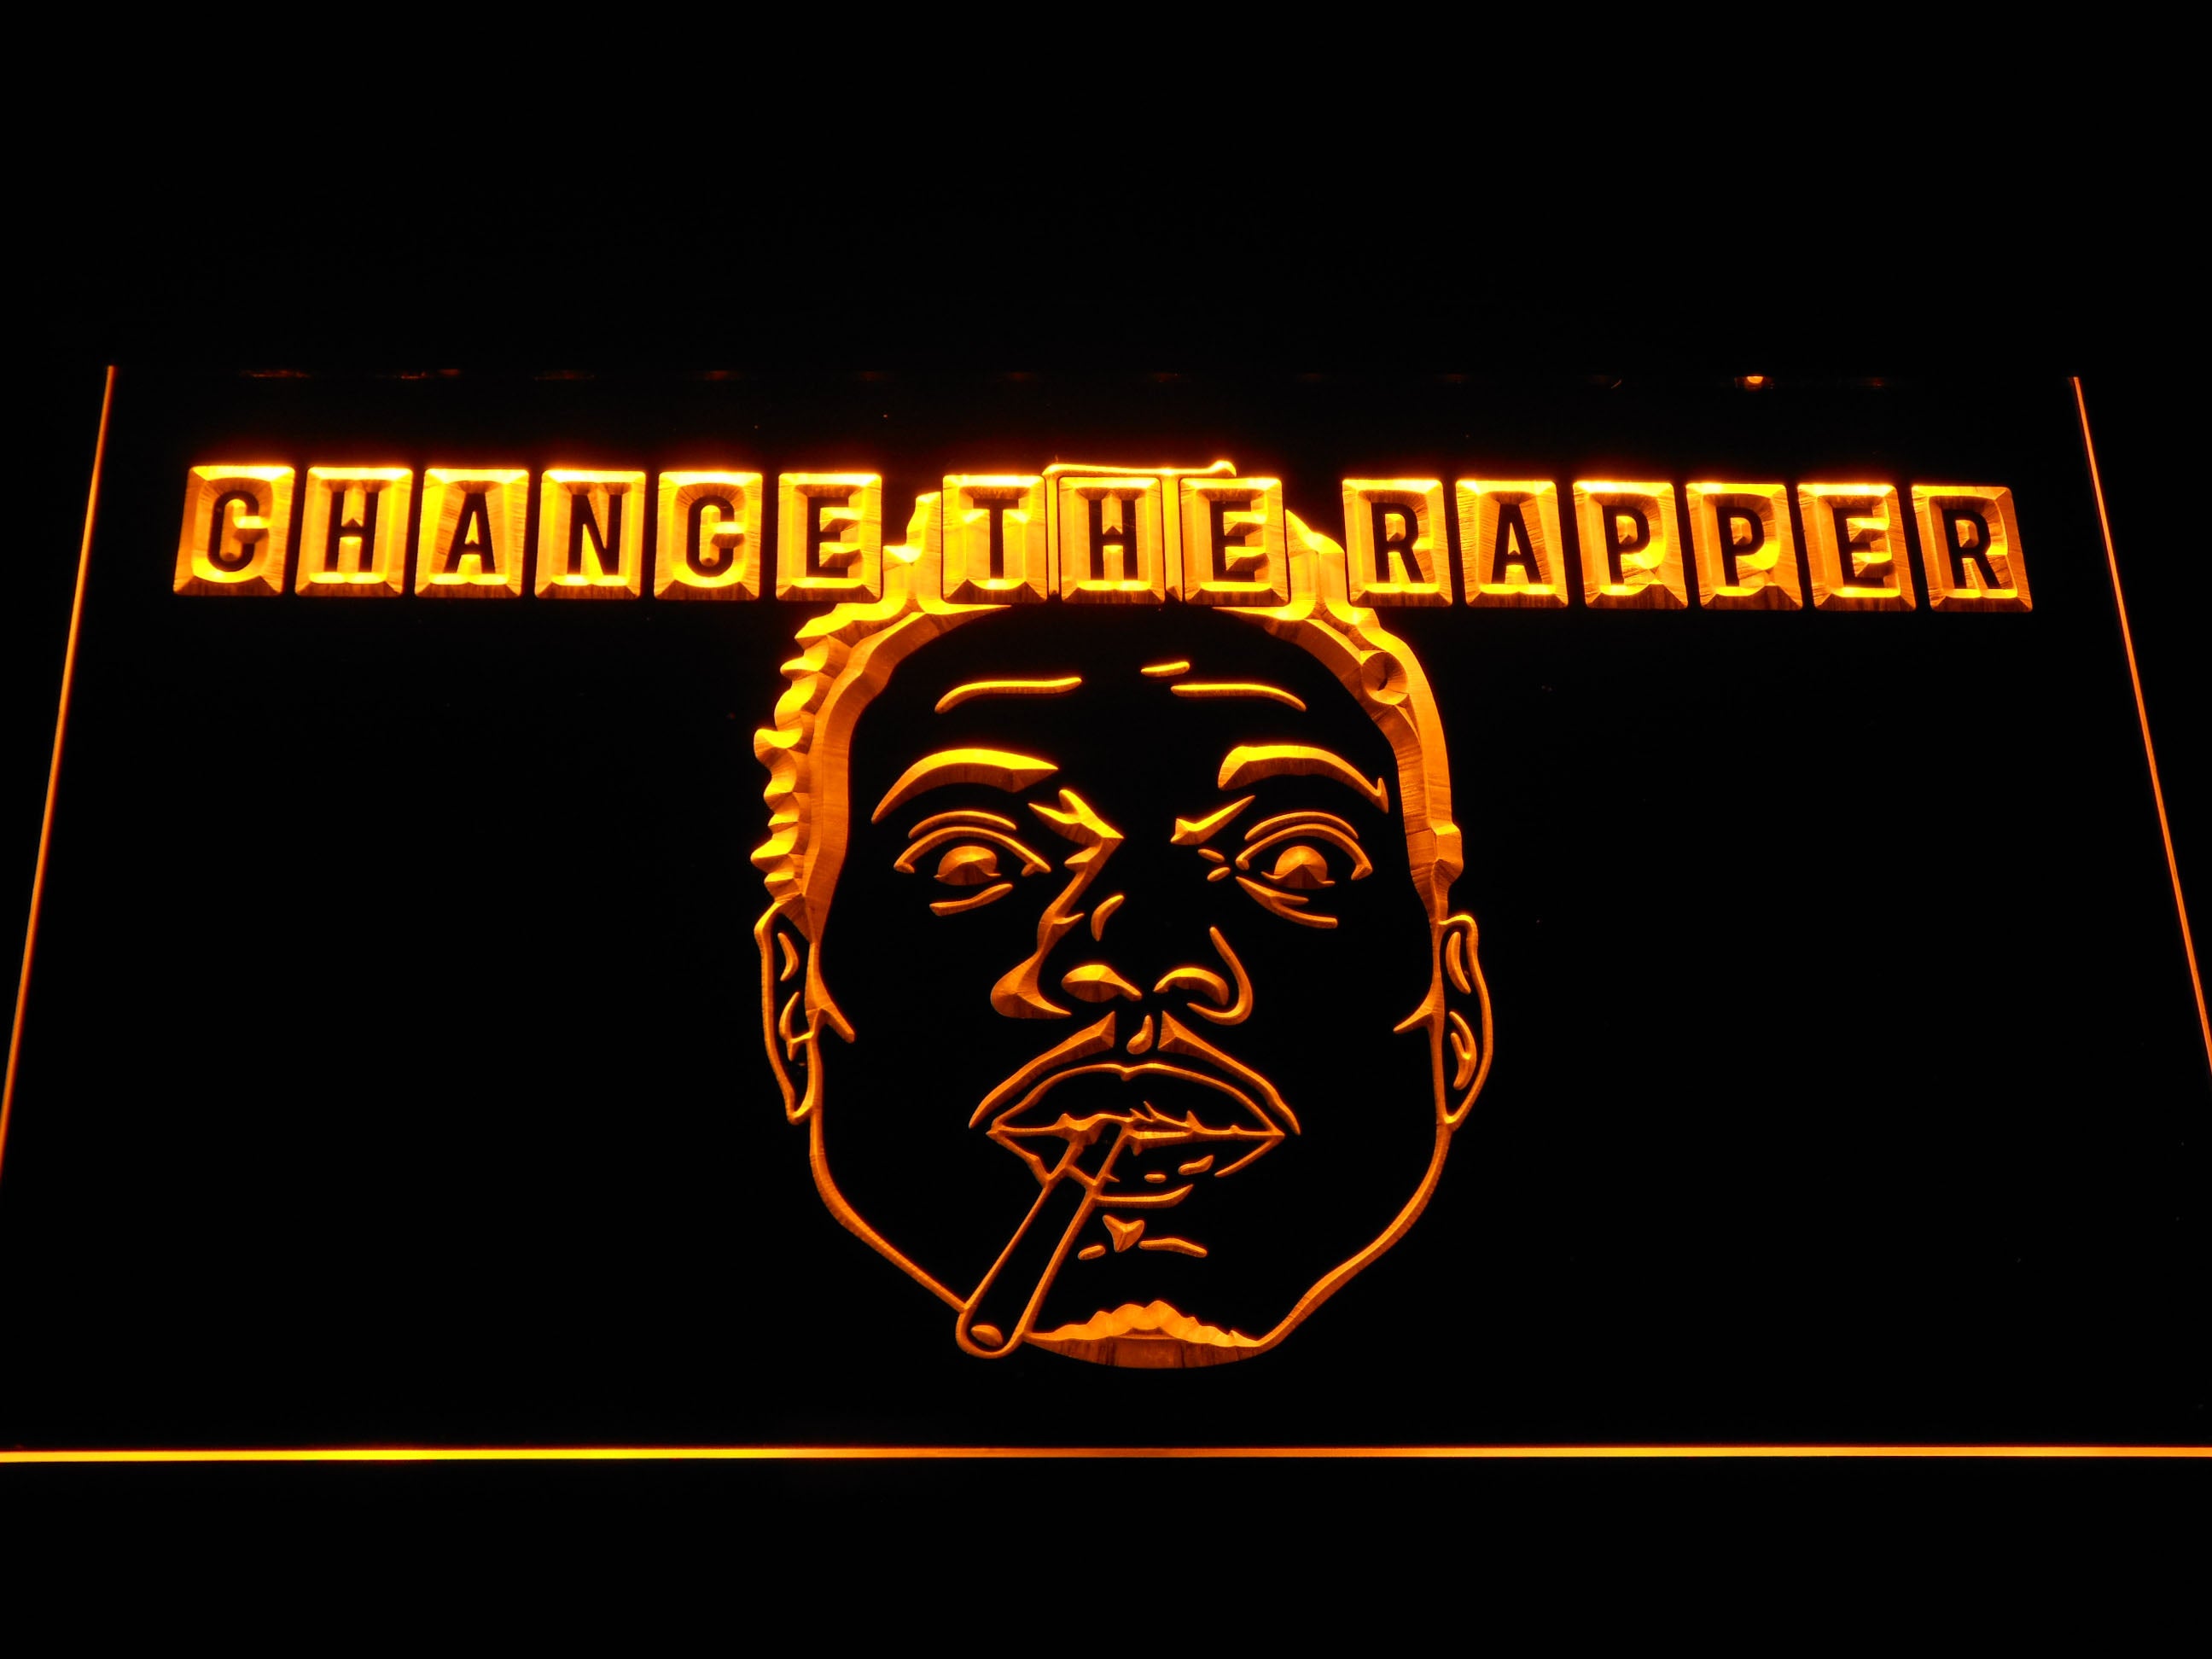 Chance The Rapper Music LED Neon Sign